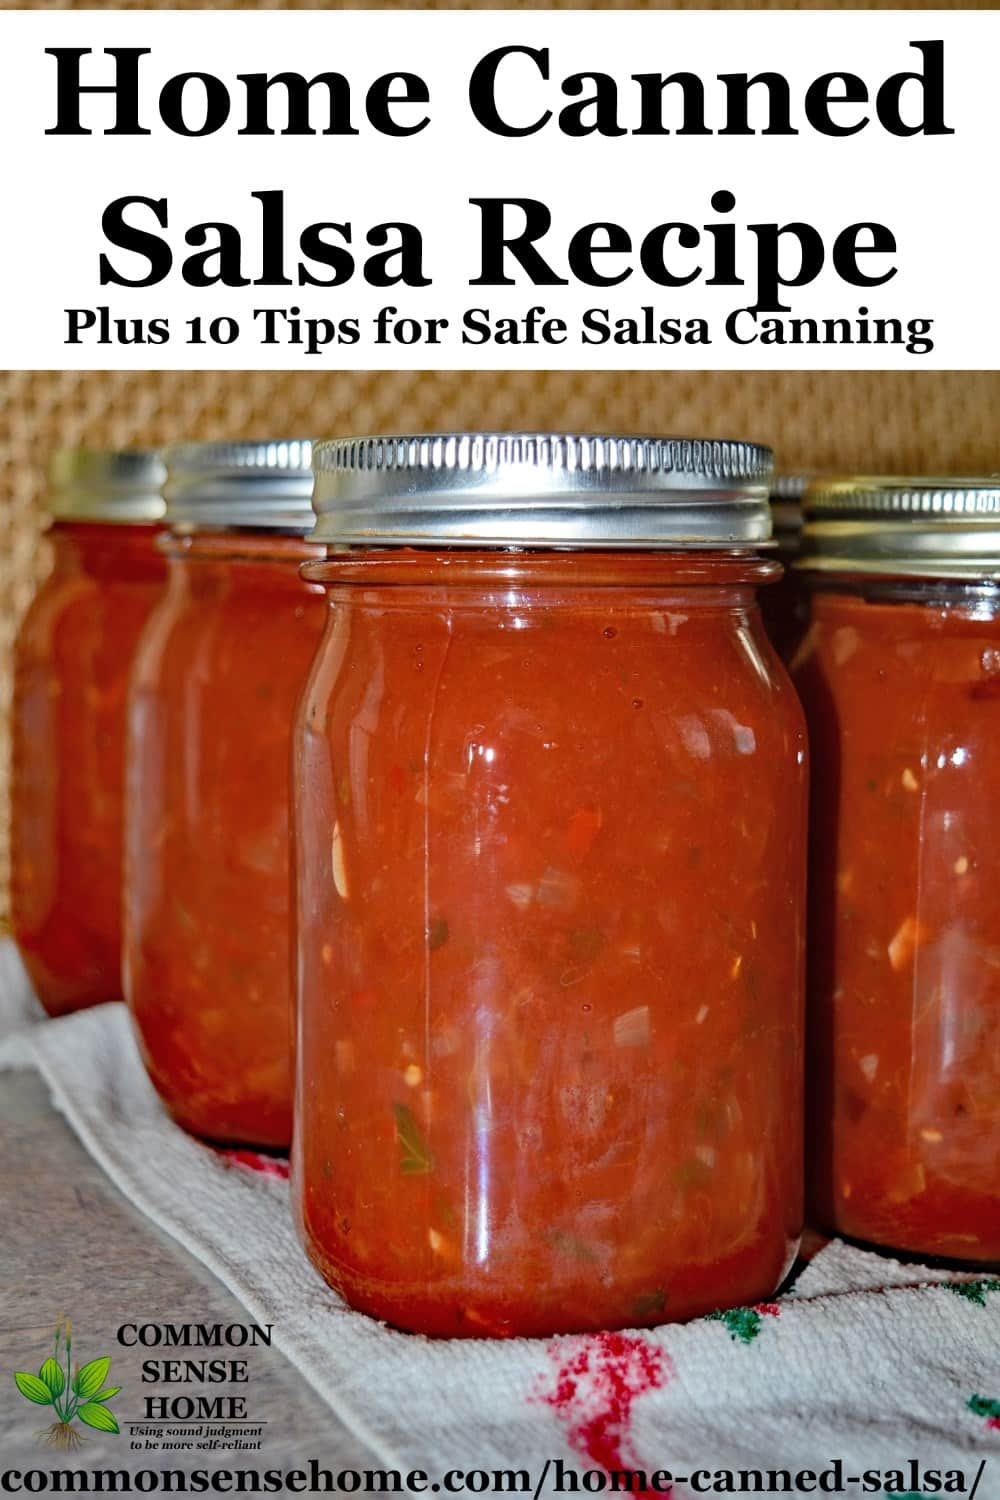 Canning Salsa Recipe
 Home Canned Salsa Recipe Plus 10 Tips for Canning Salsa